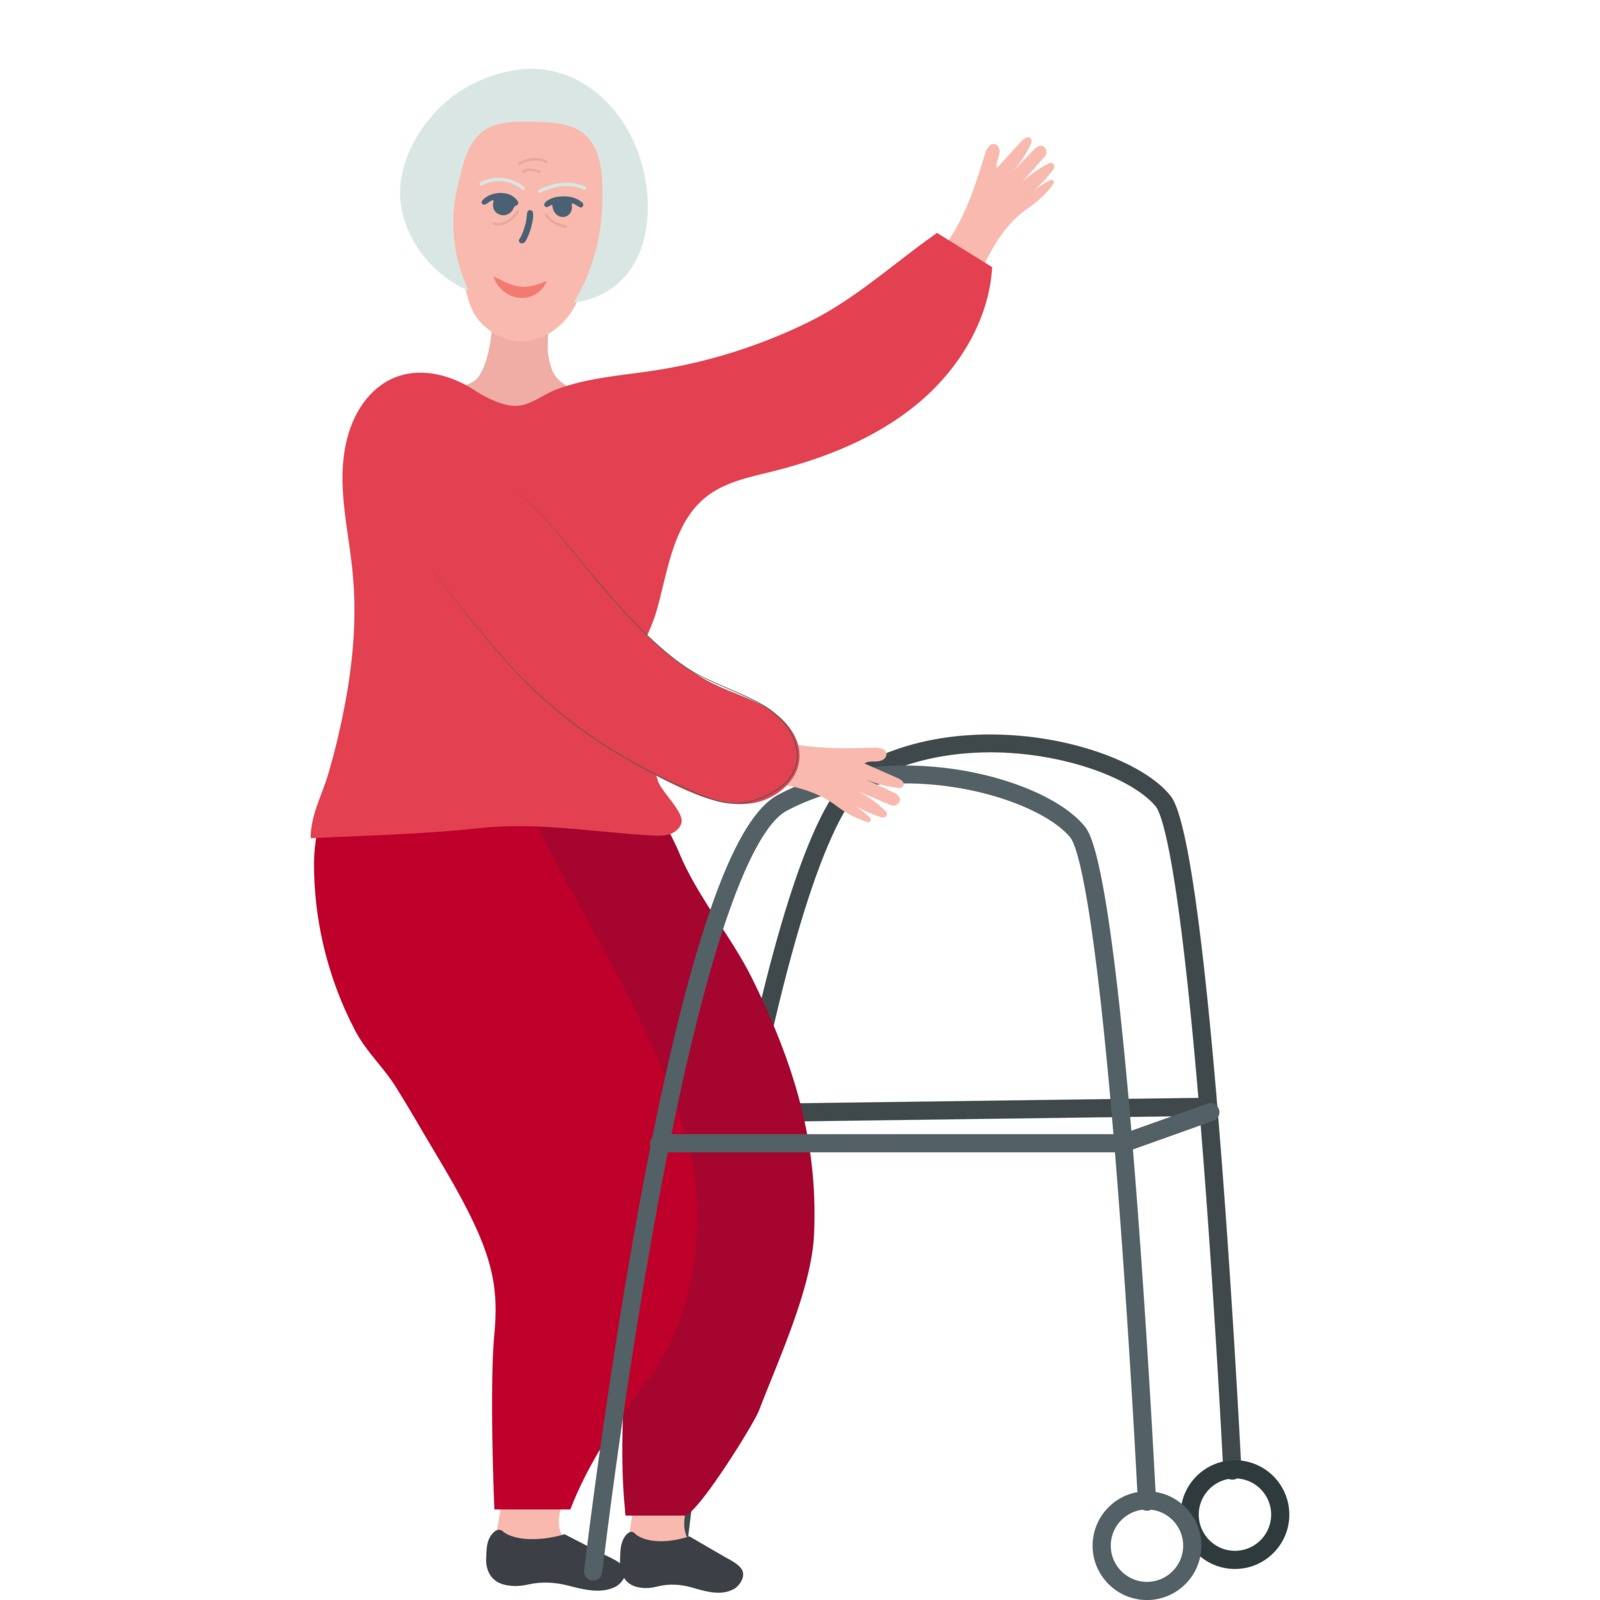 Elderly Lady with Walker isolated on white background. Old people lifestyle concept. Flat cartoon style. Vector illustration.